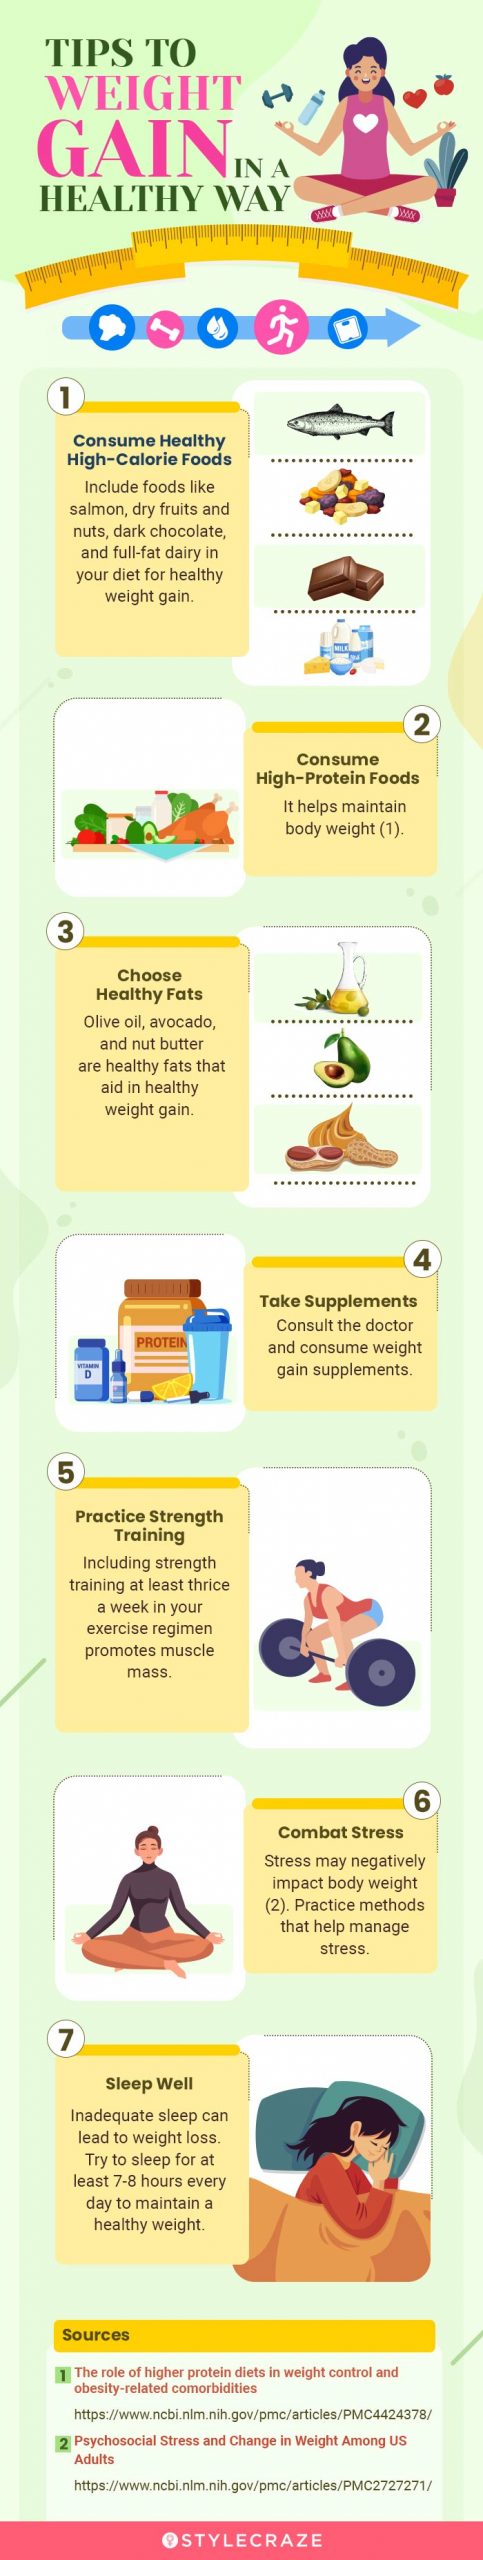 tips to gain weight in a healthy way [infographic]